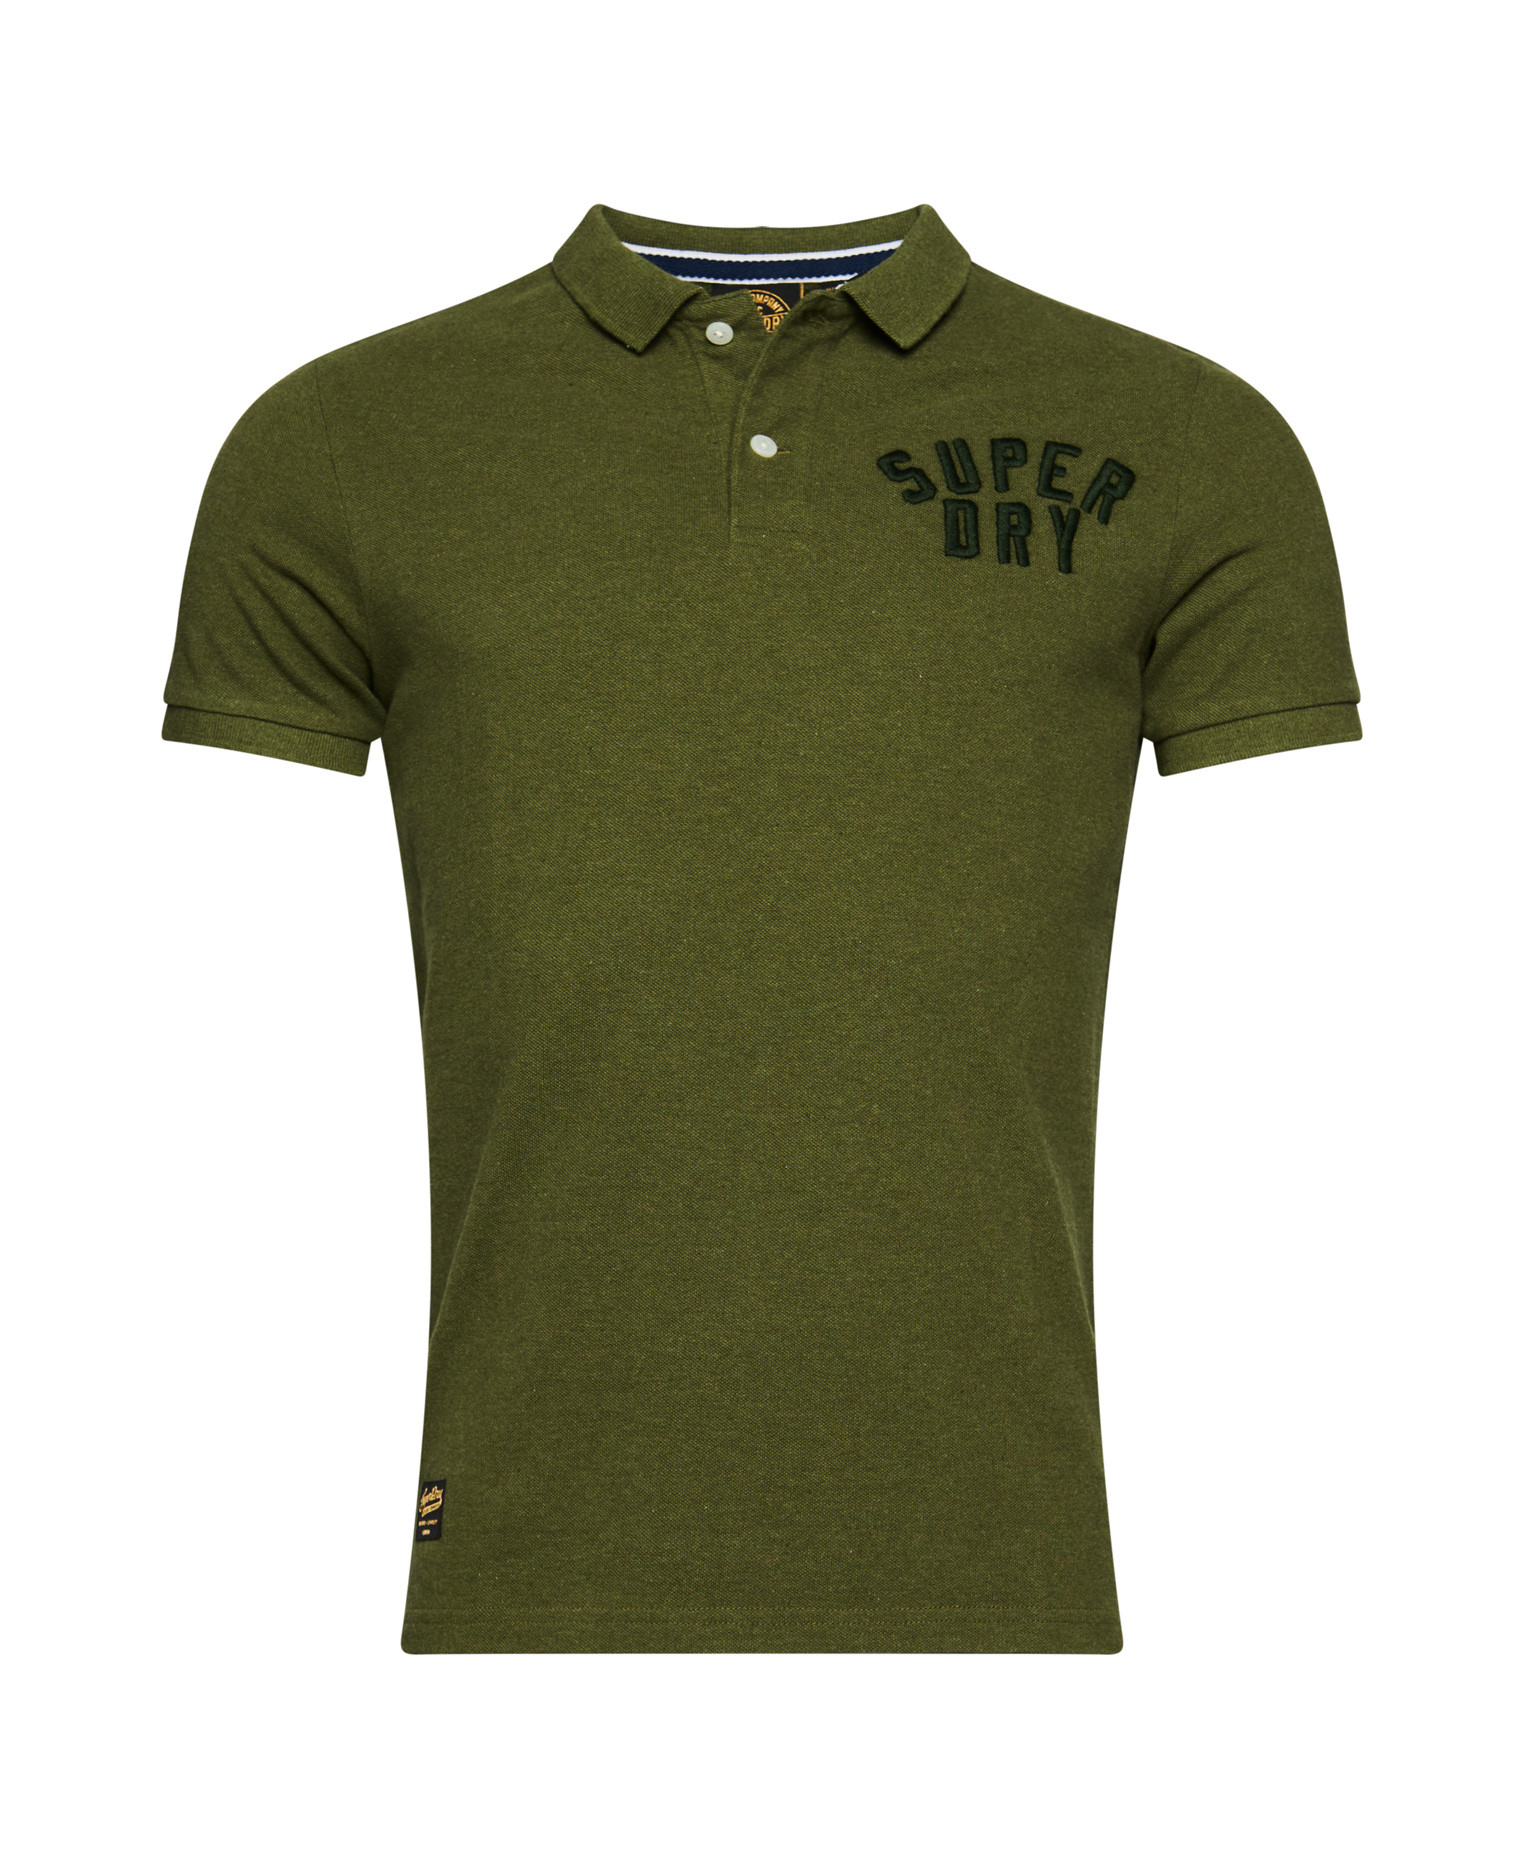 Superdry - Polo in cotone piquet con logo, Verde, large image number 0